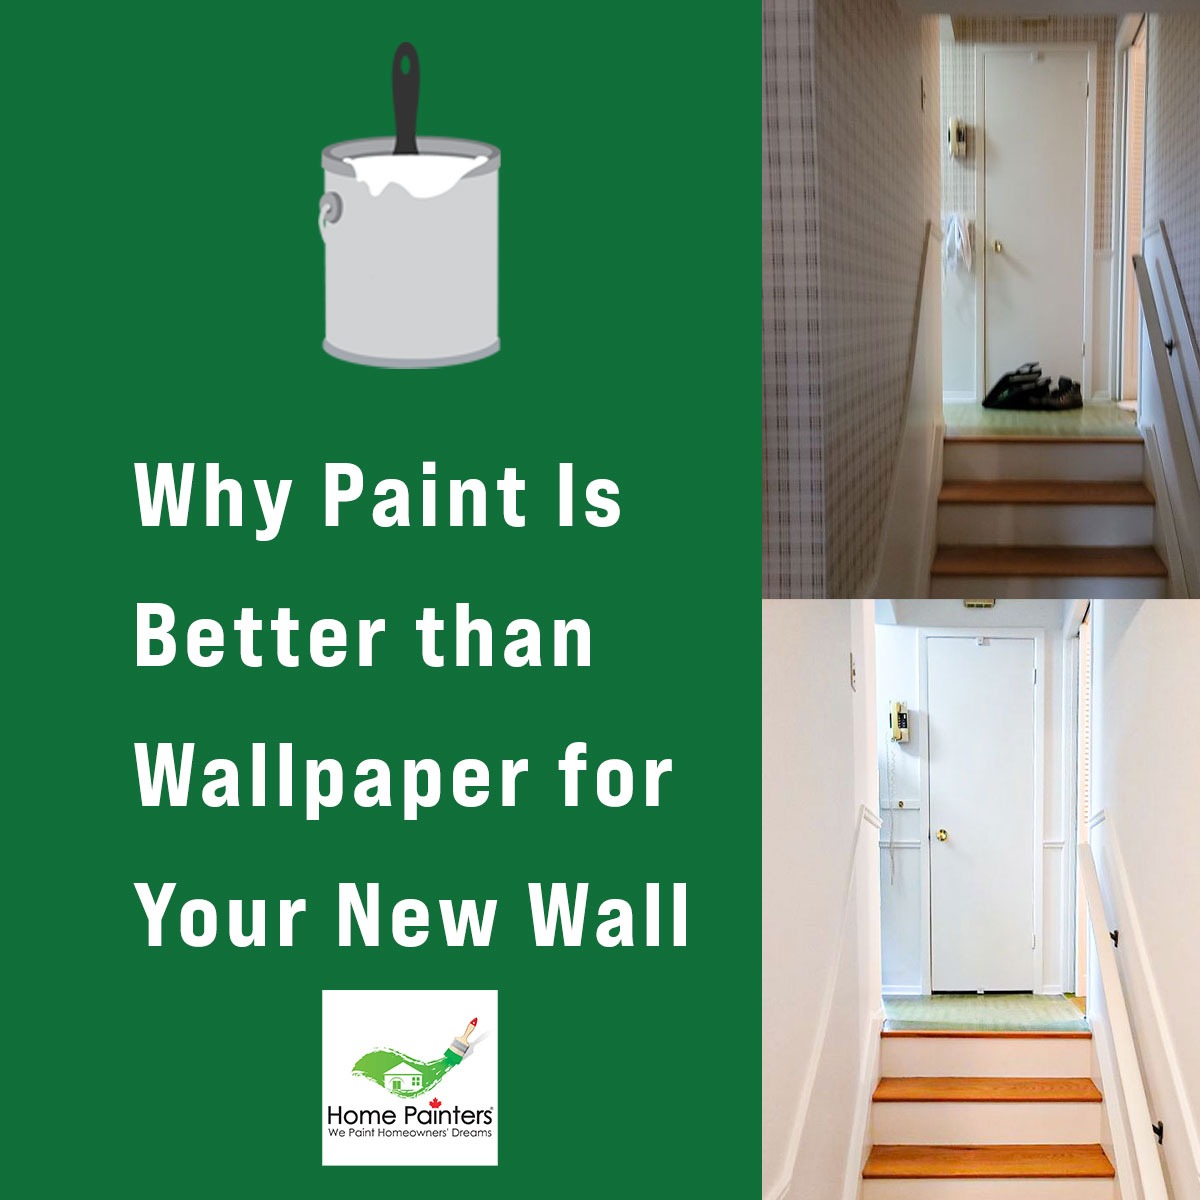 Why Paint Is Better than Wallpaper for Your New Wall - HPT Blog